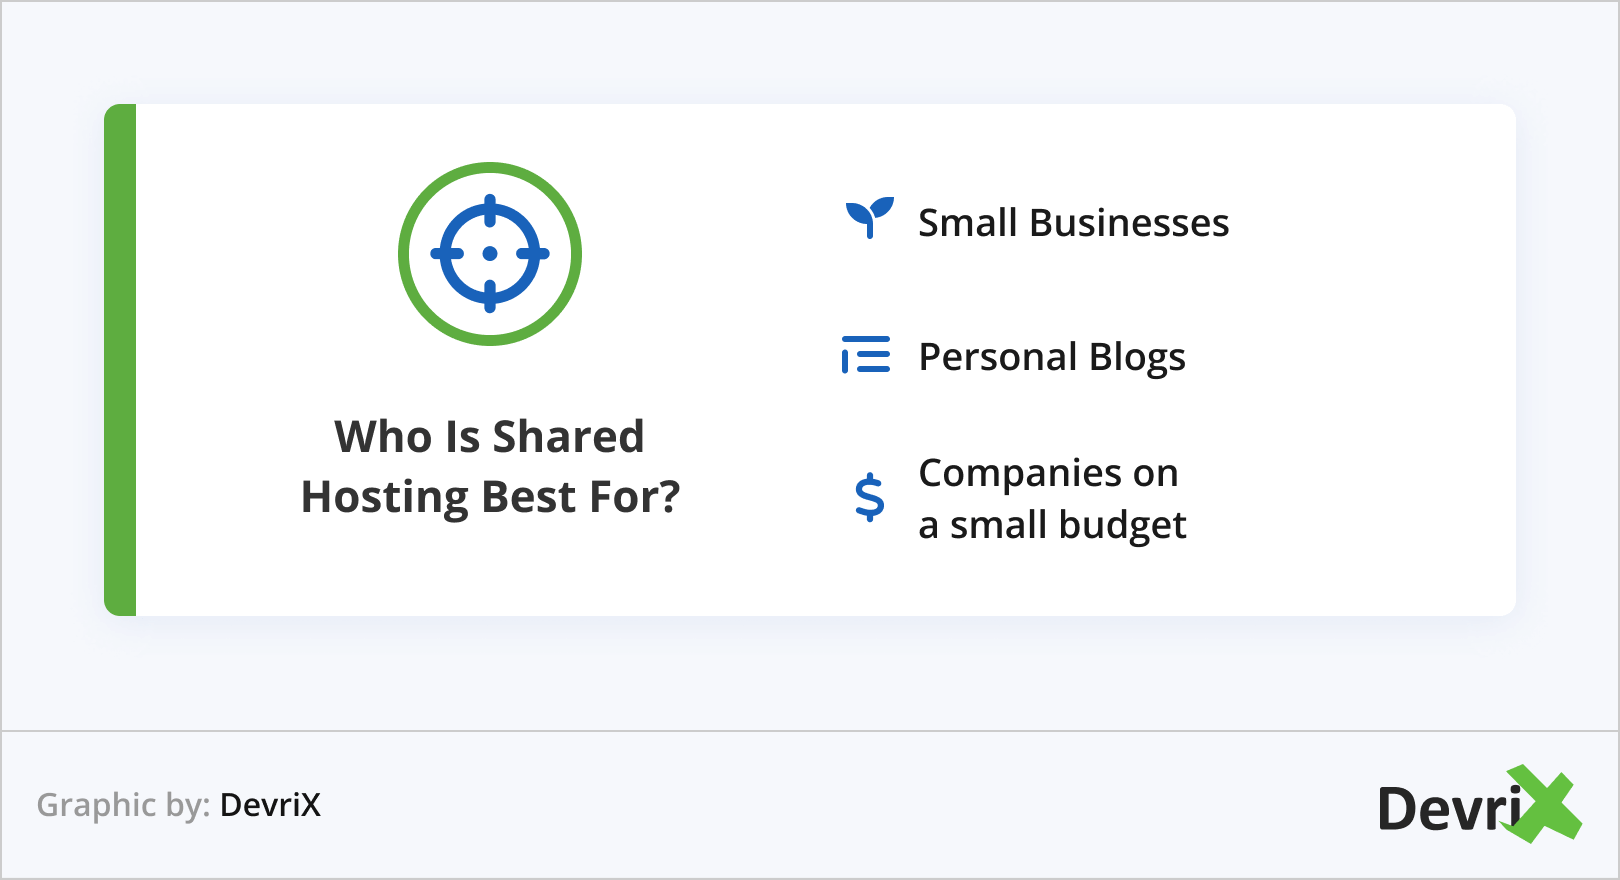 4. Who is shared hosting best for